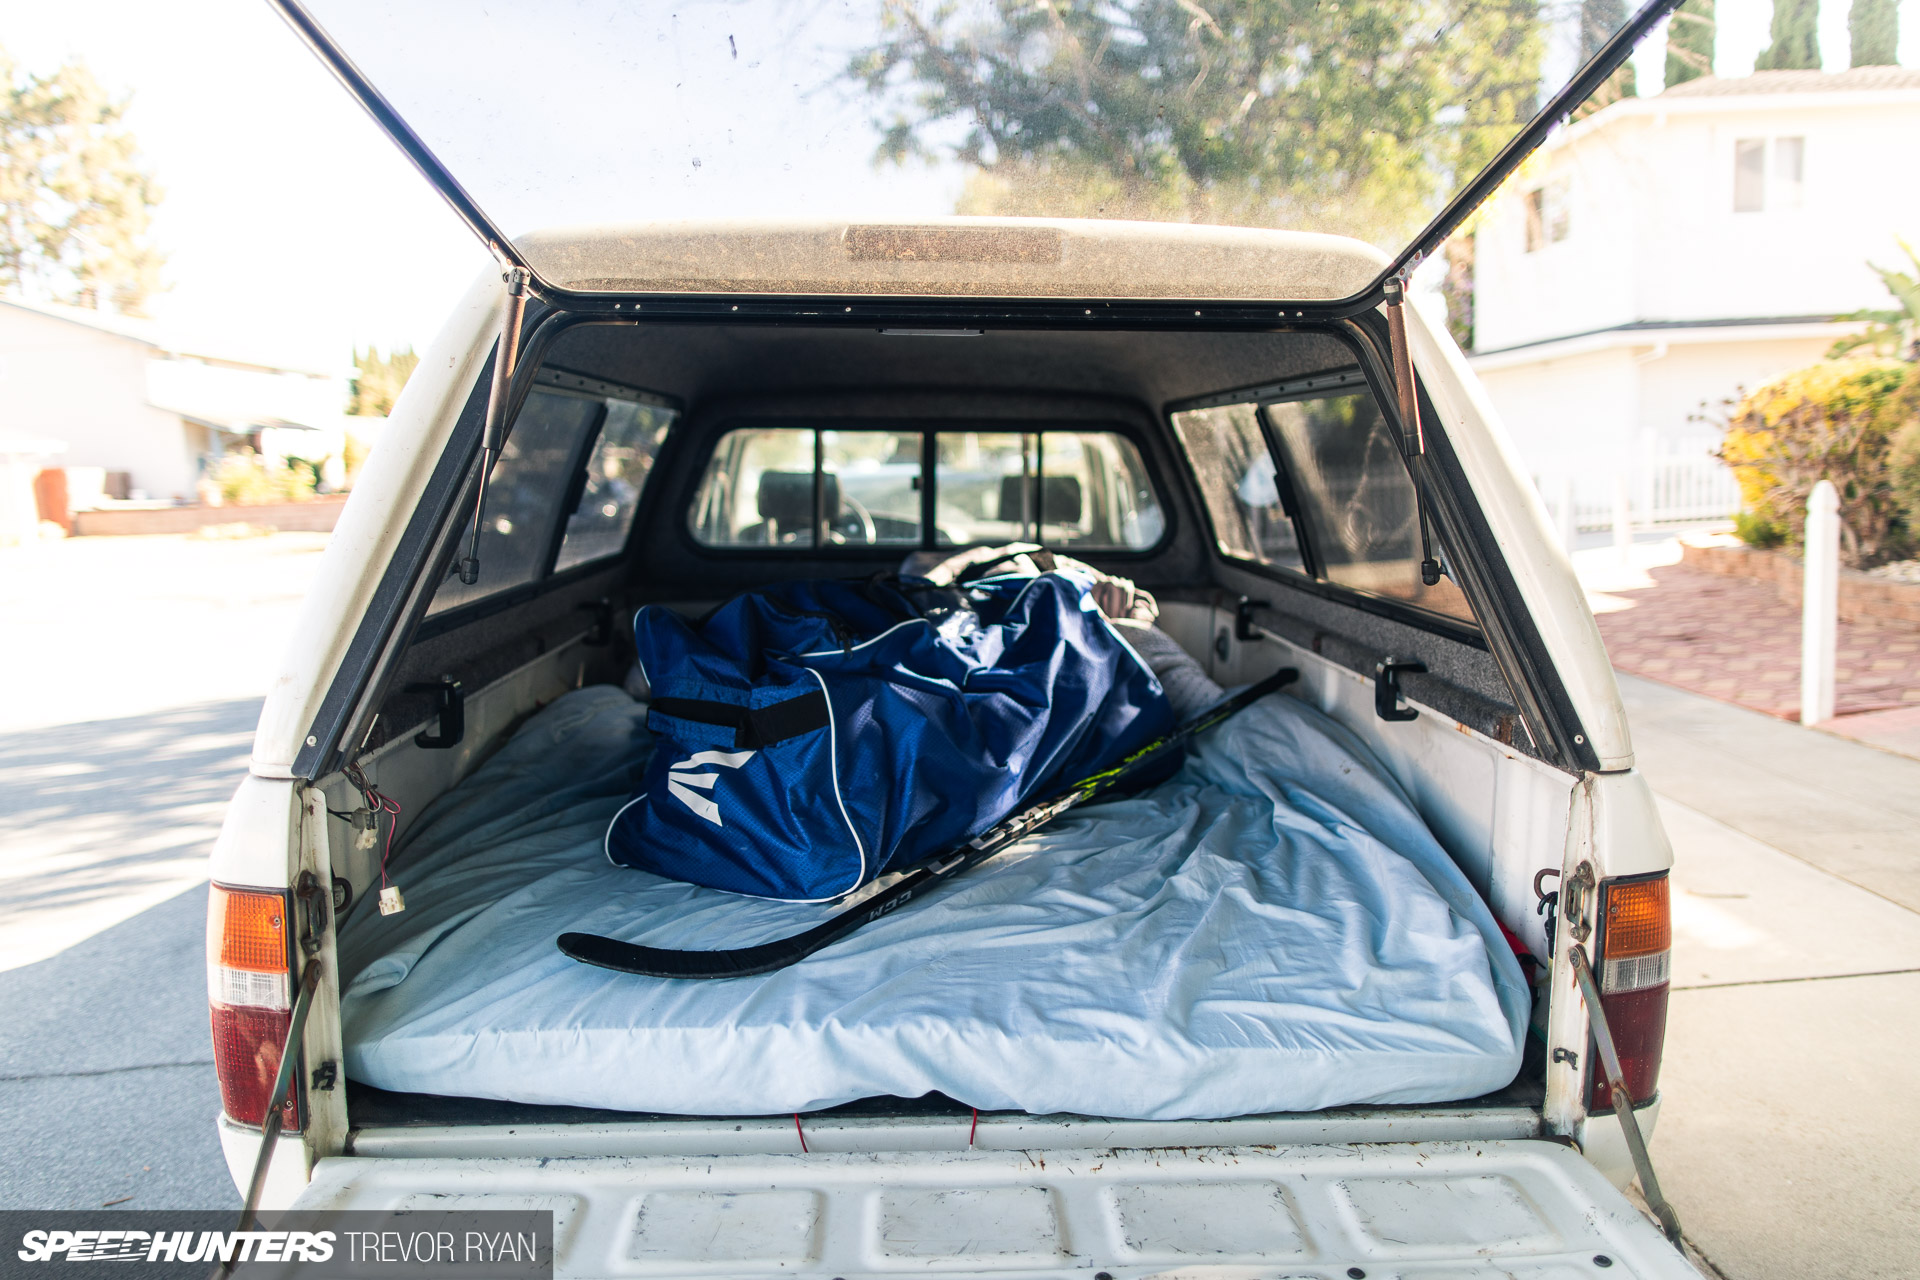 toyota pickup, toyota, speedhunters project cars, speedhunters garage, sh garage, project cars, project car, offroad, off-road, hilux, 4wd, 4runner, taking a ’91 toyota pickup on an off-road adventure